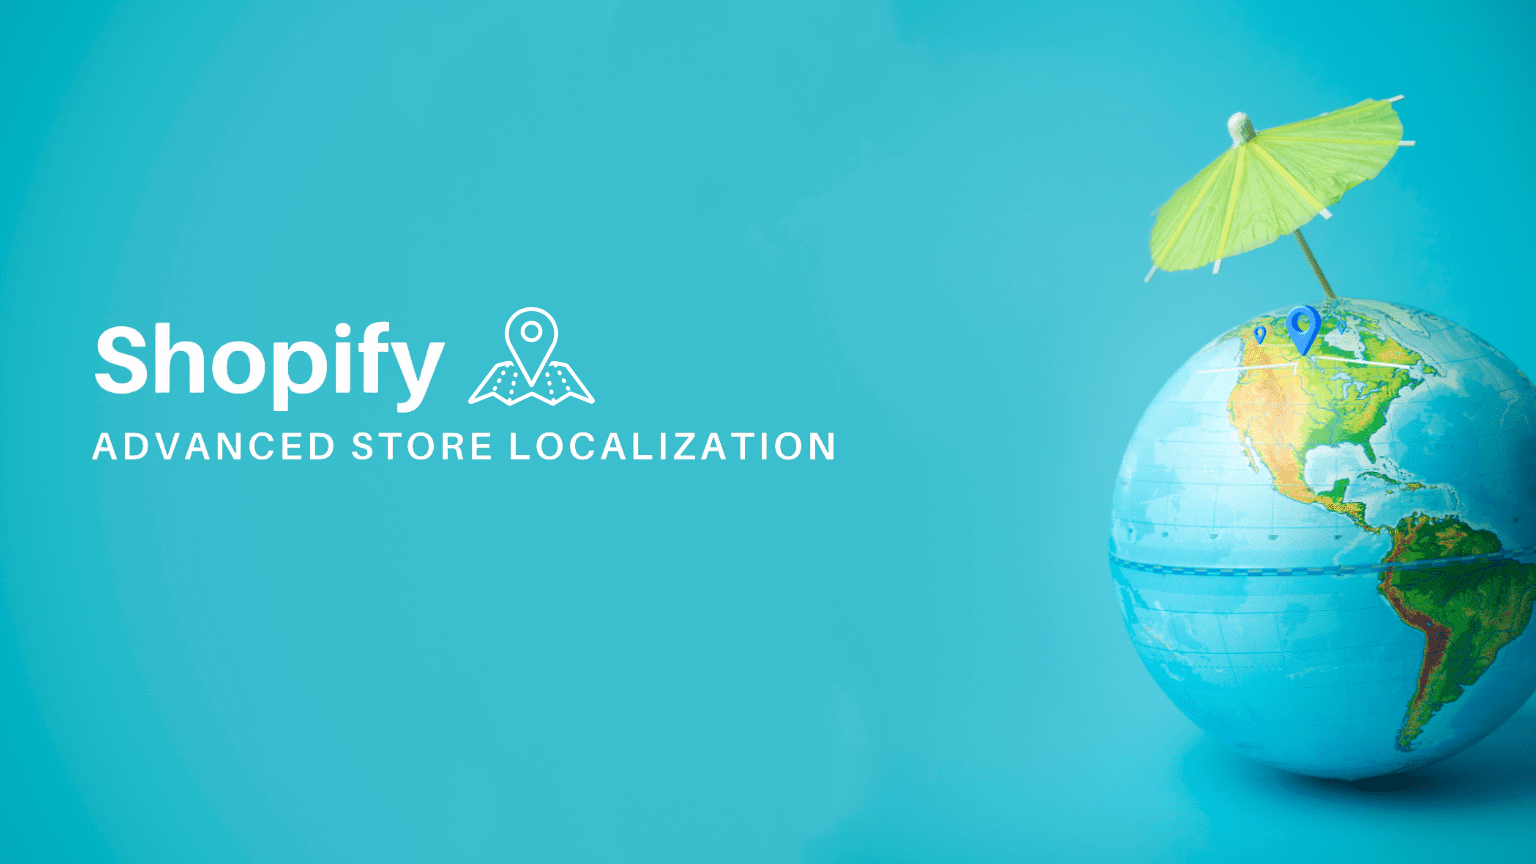 localization strategy with shopify and globe